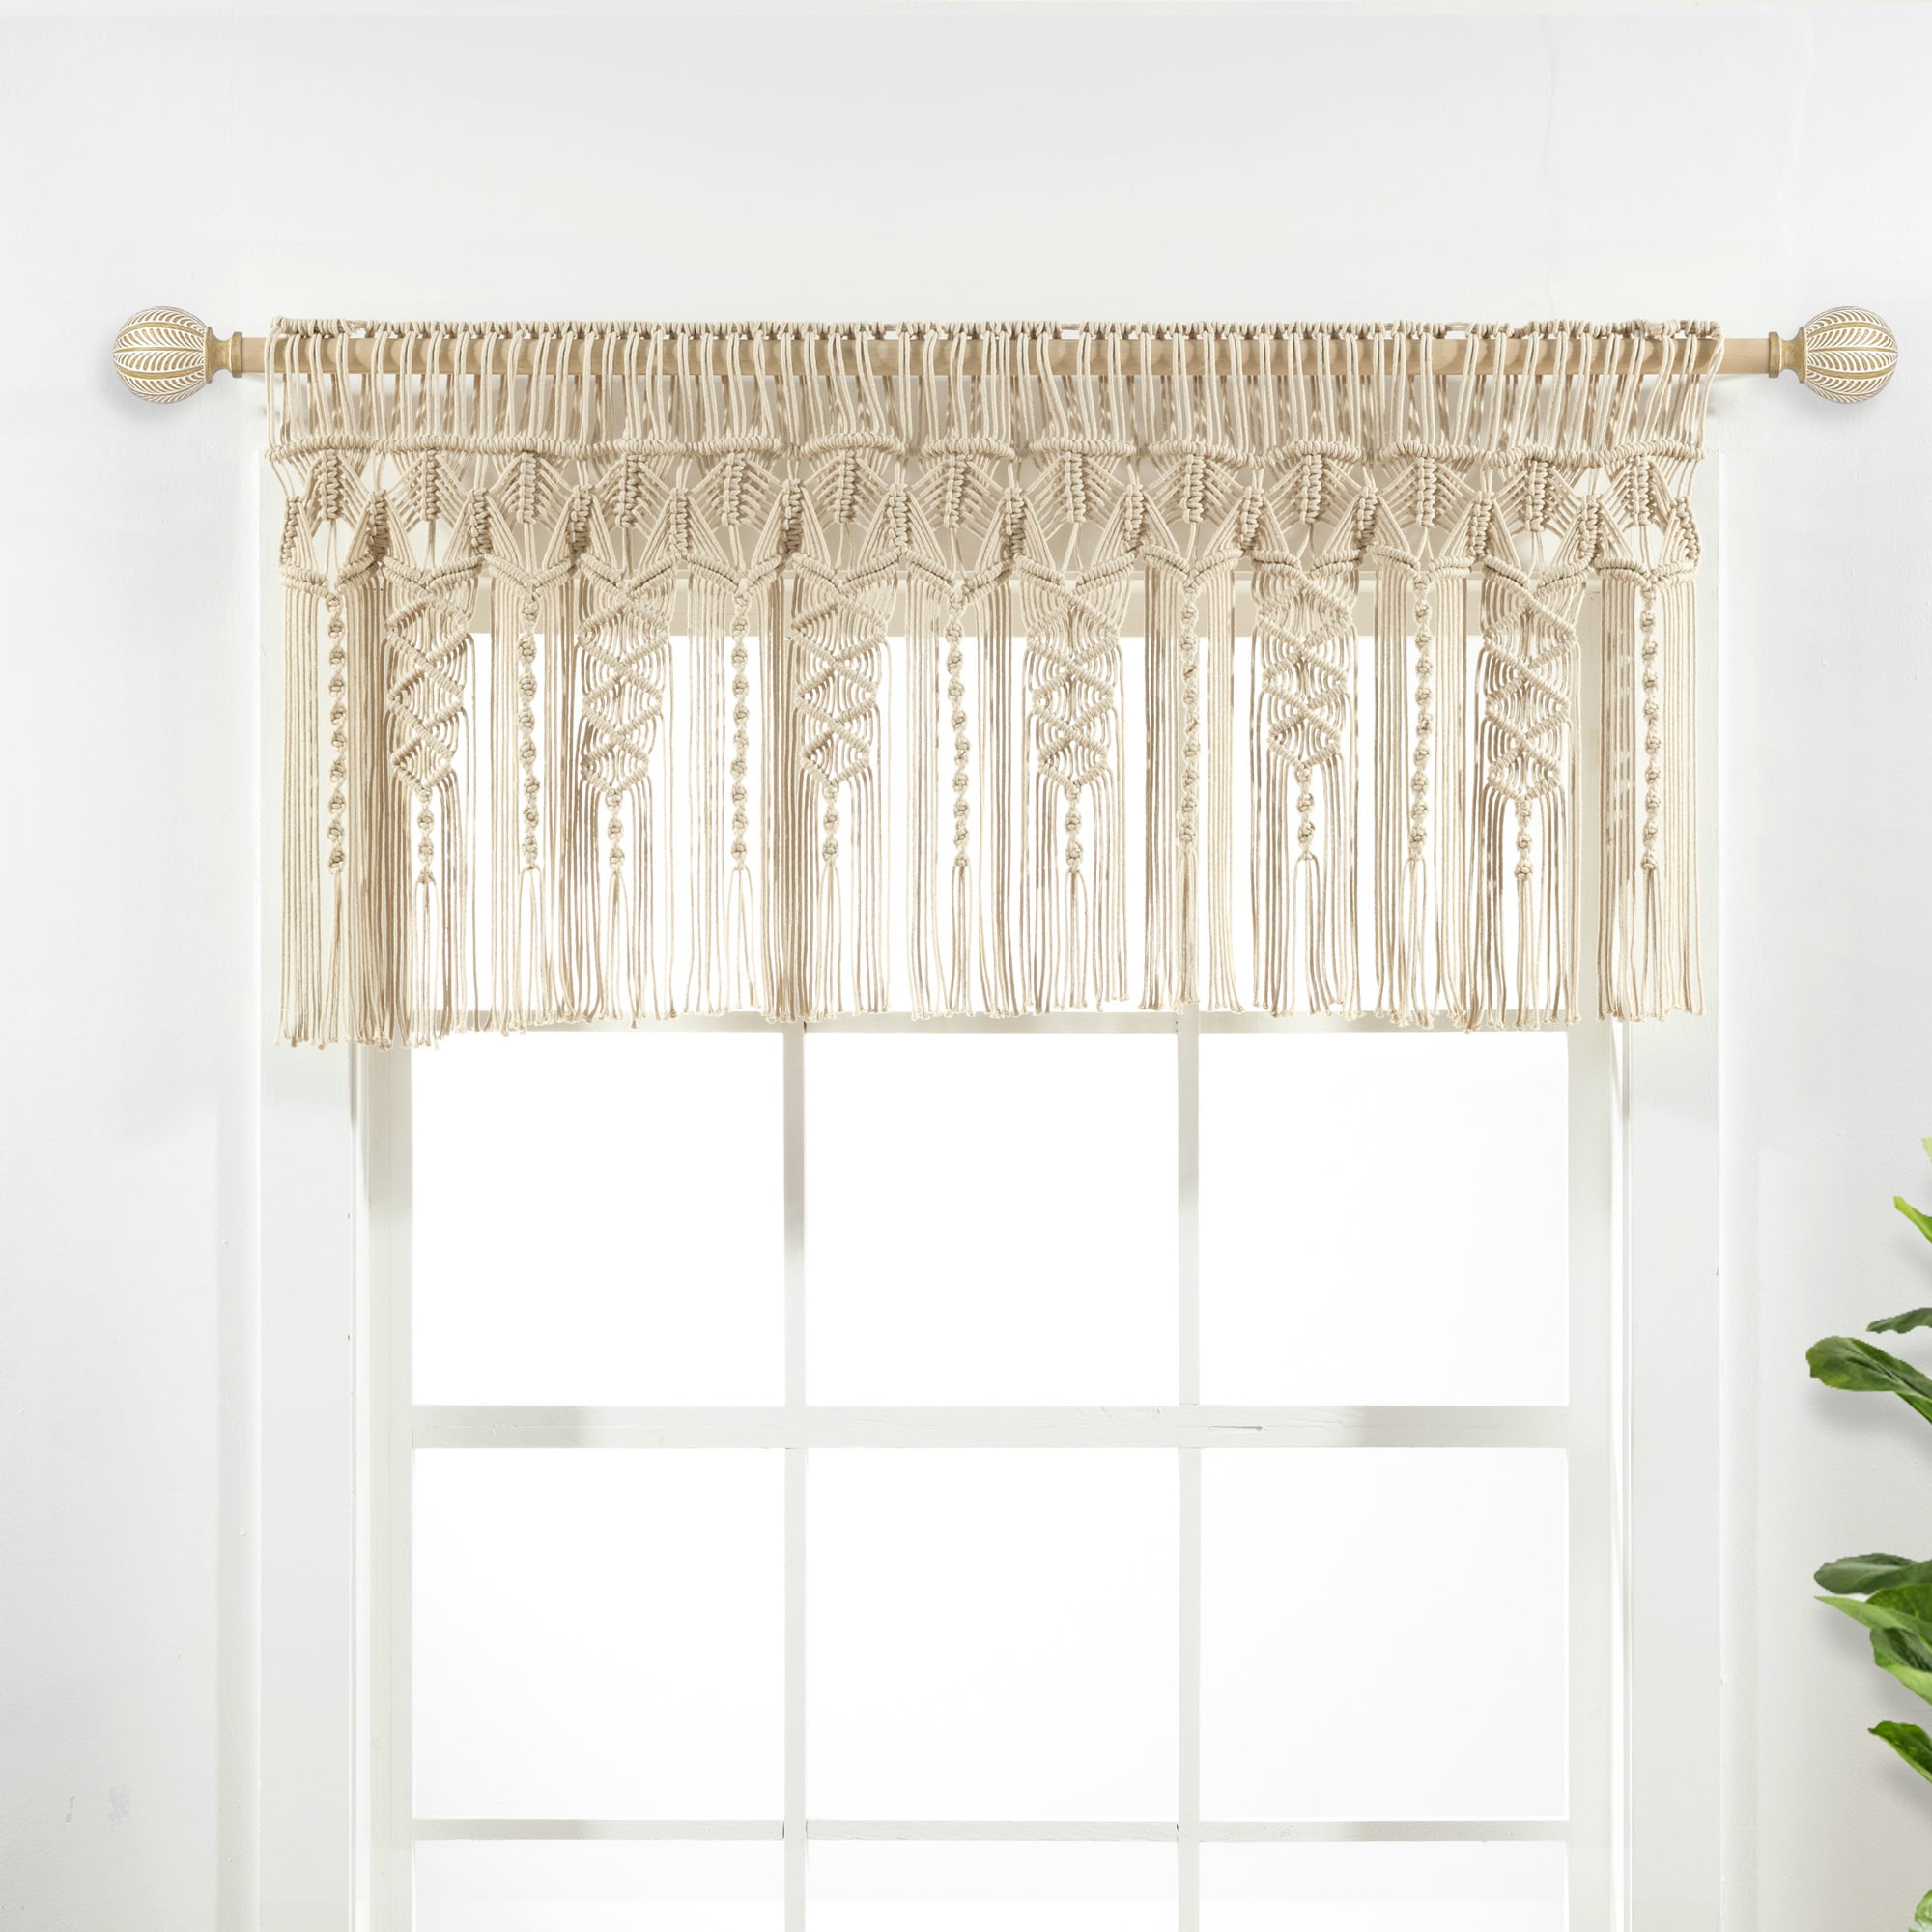 Heritage Lace White SAND DOLLAR Window Valance with Trim 45"Wx15"L 